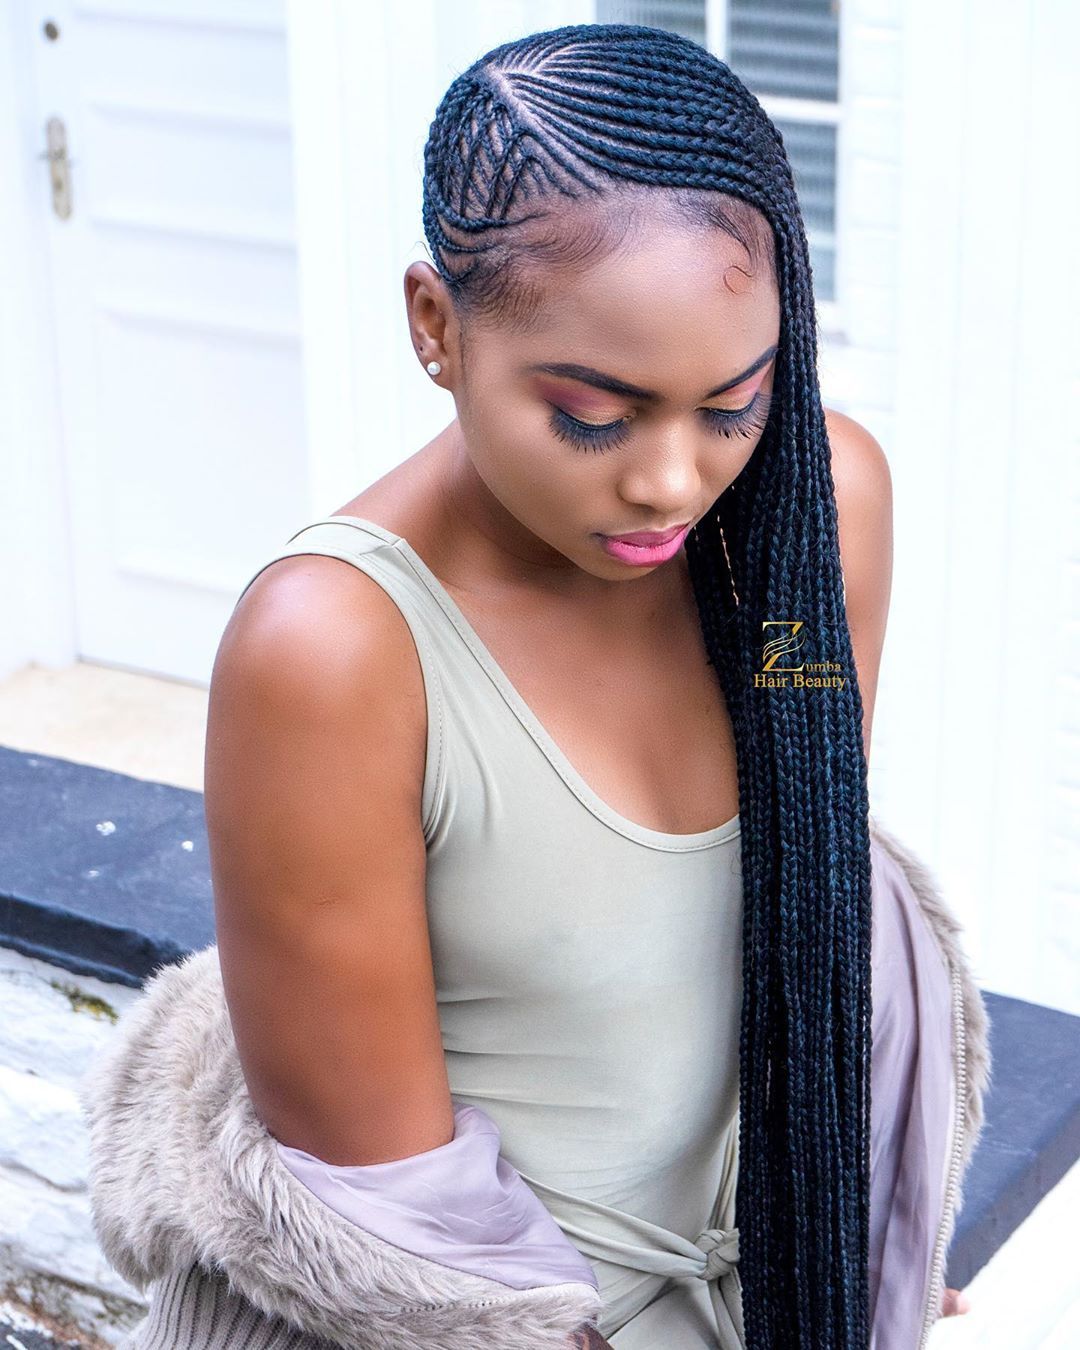 Lemonade Braids Hairstyles Trends Network Explore & Discover the